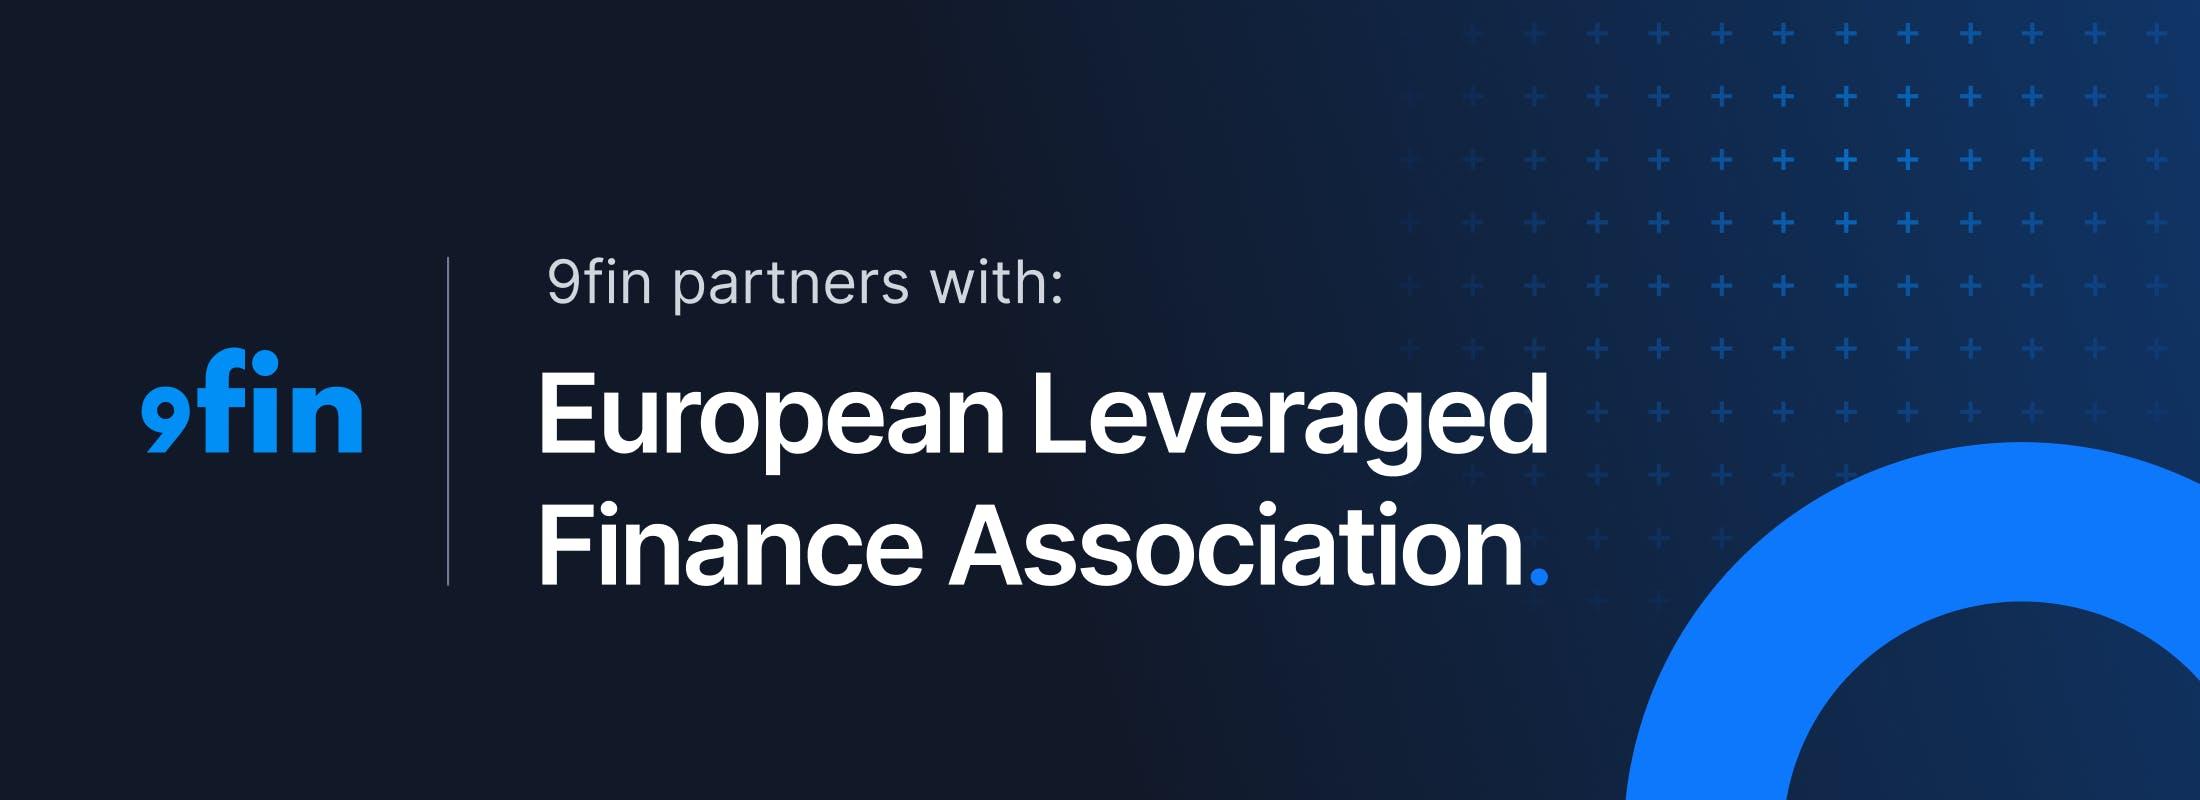 9fin partners with the European Leveraged Finance Association